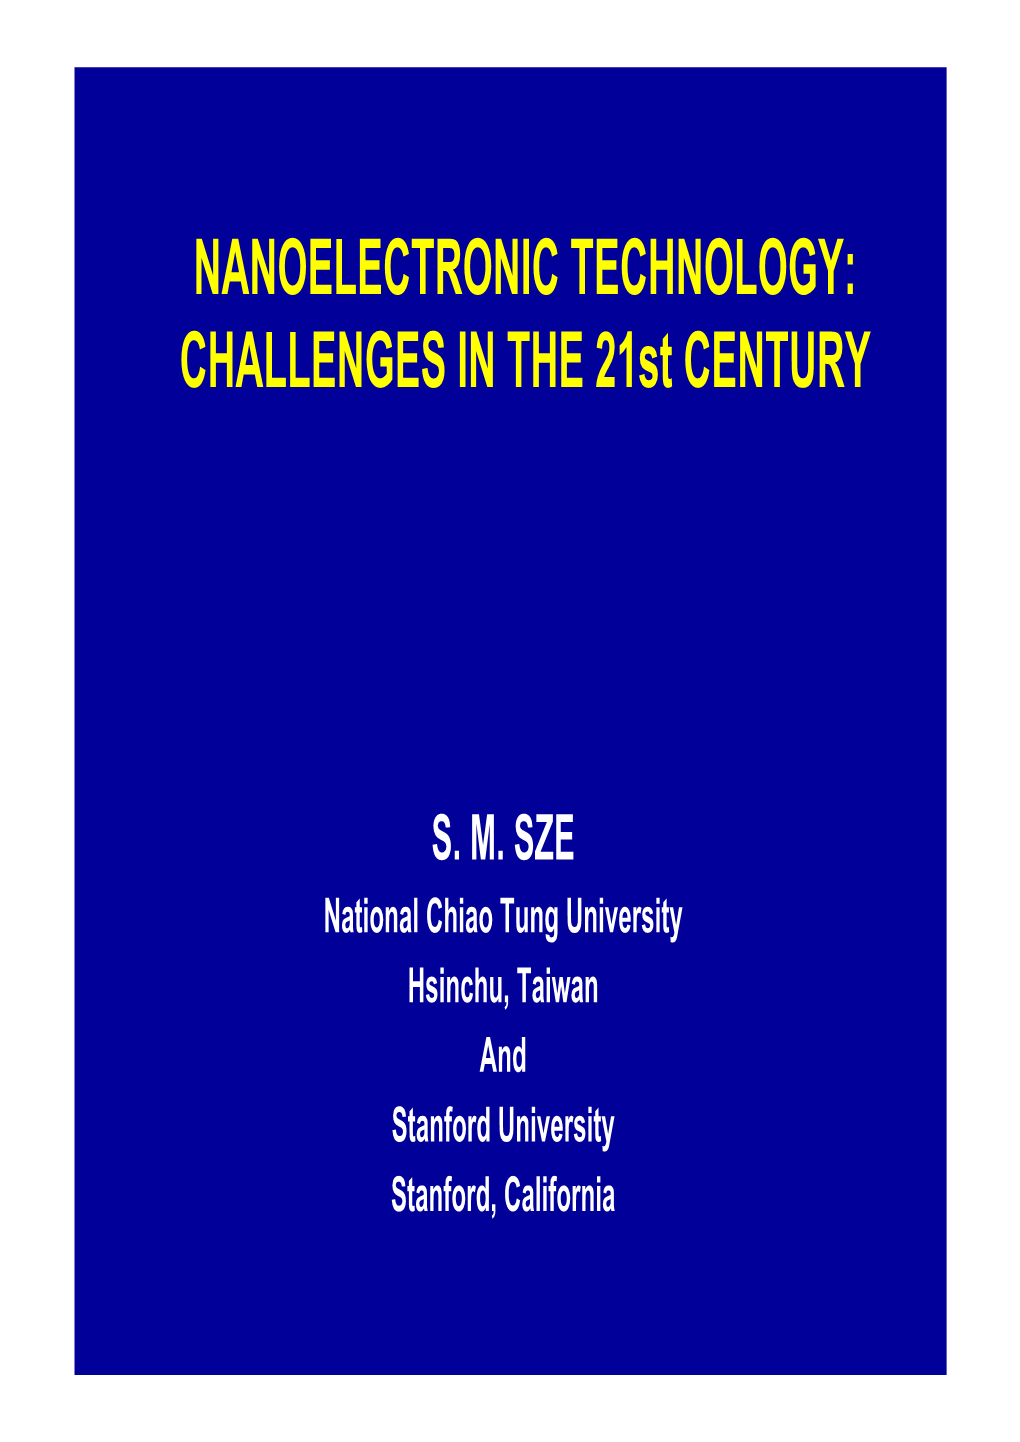 NANOELECTRONIC TECHNOLOGY: CHALLENGES in the 21St CENTURY